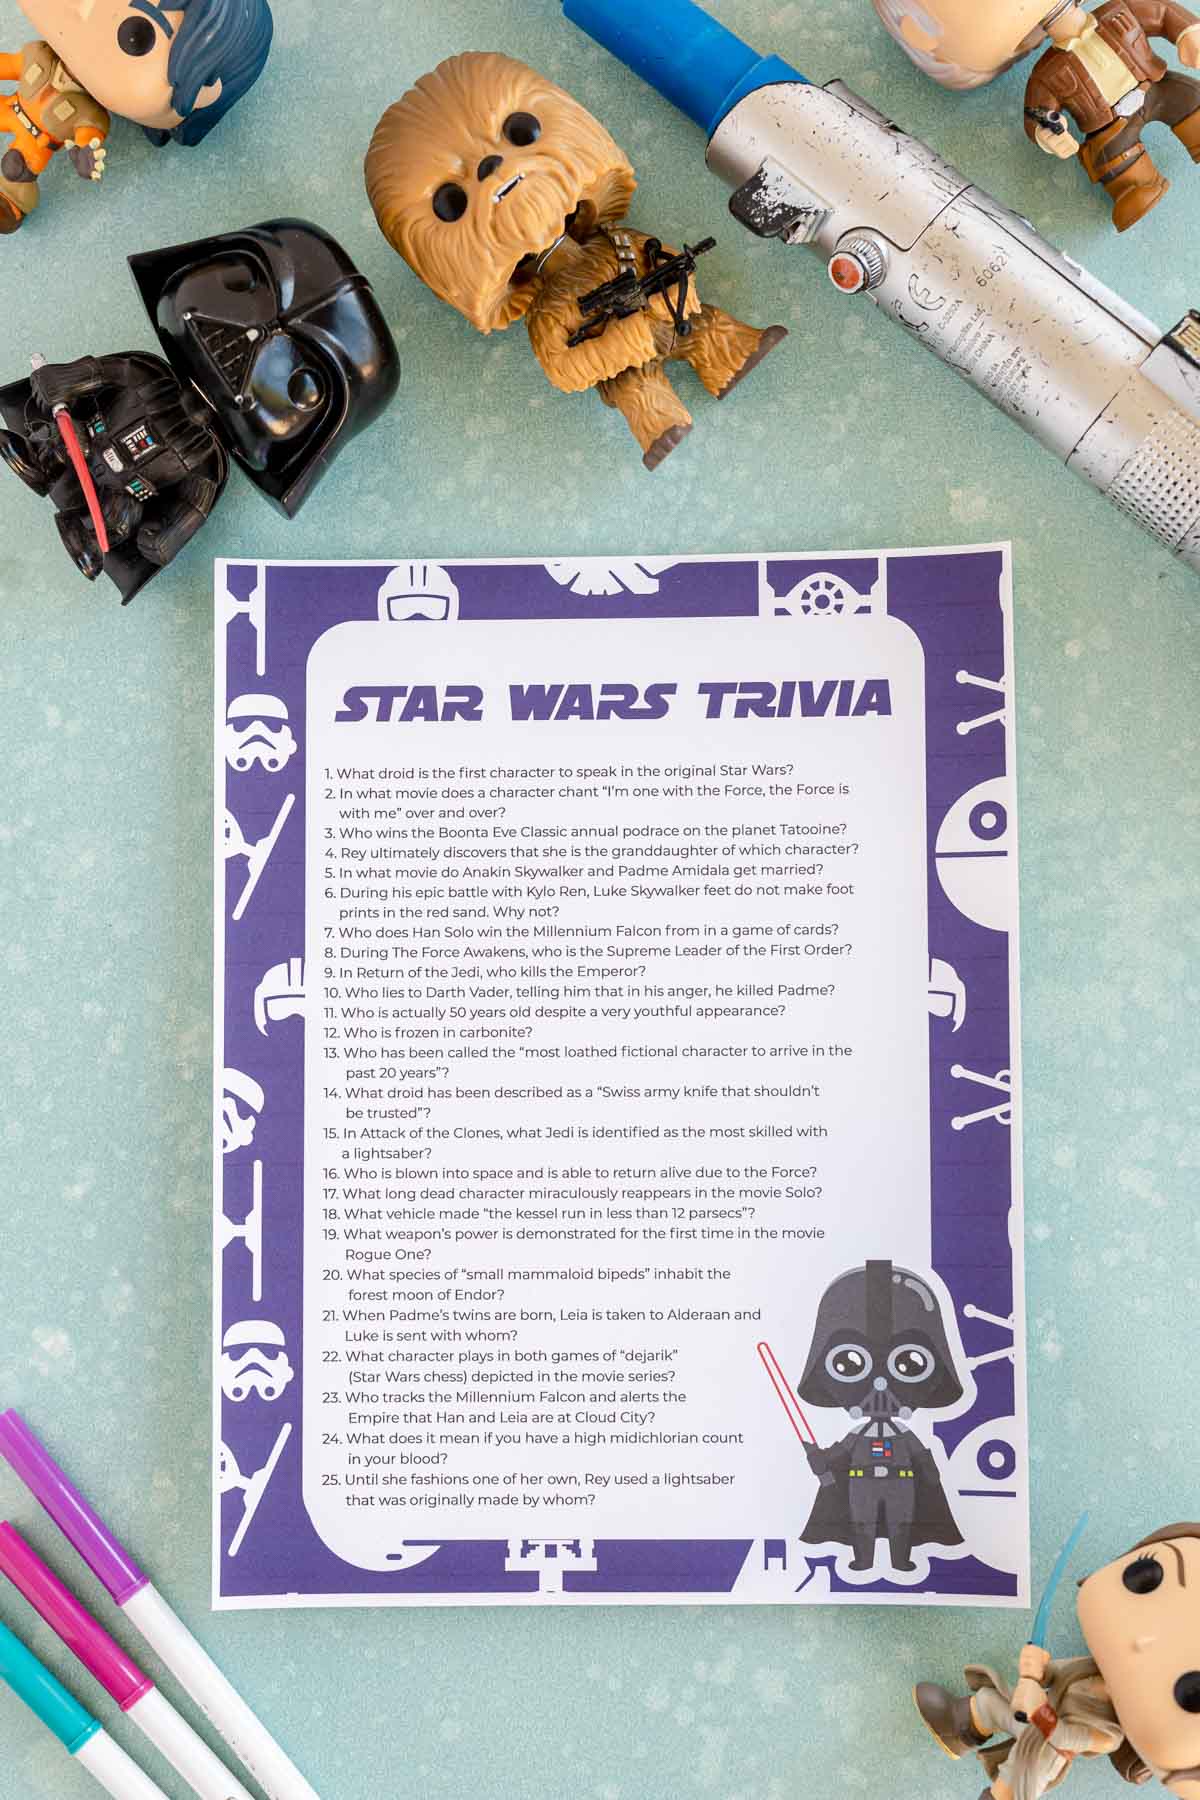 Printed out Star Wars trivia quiz